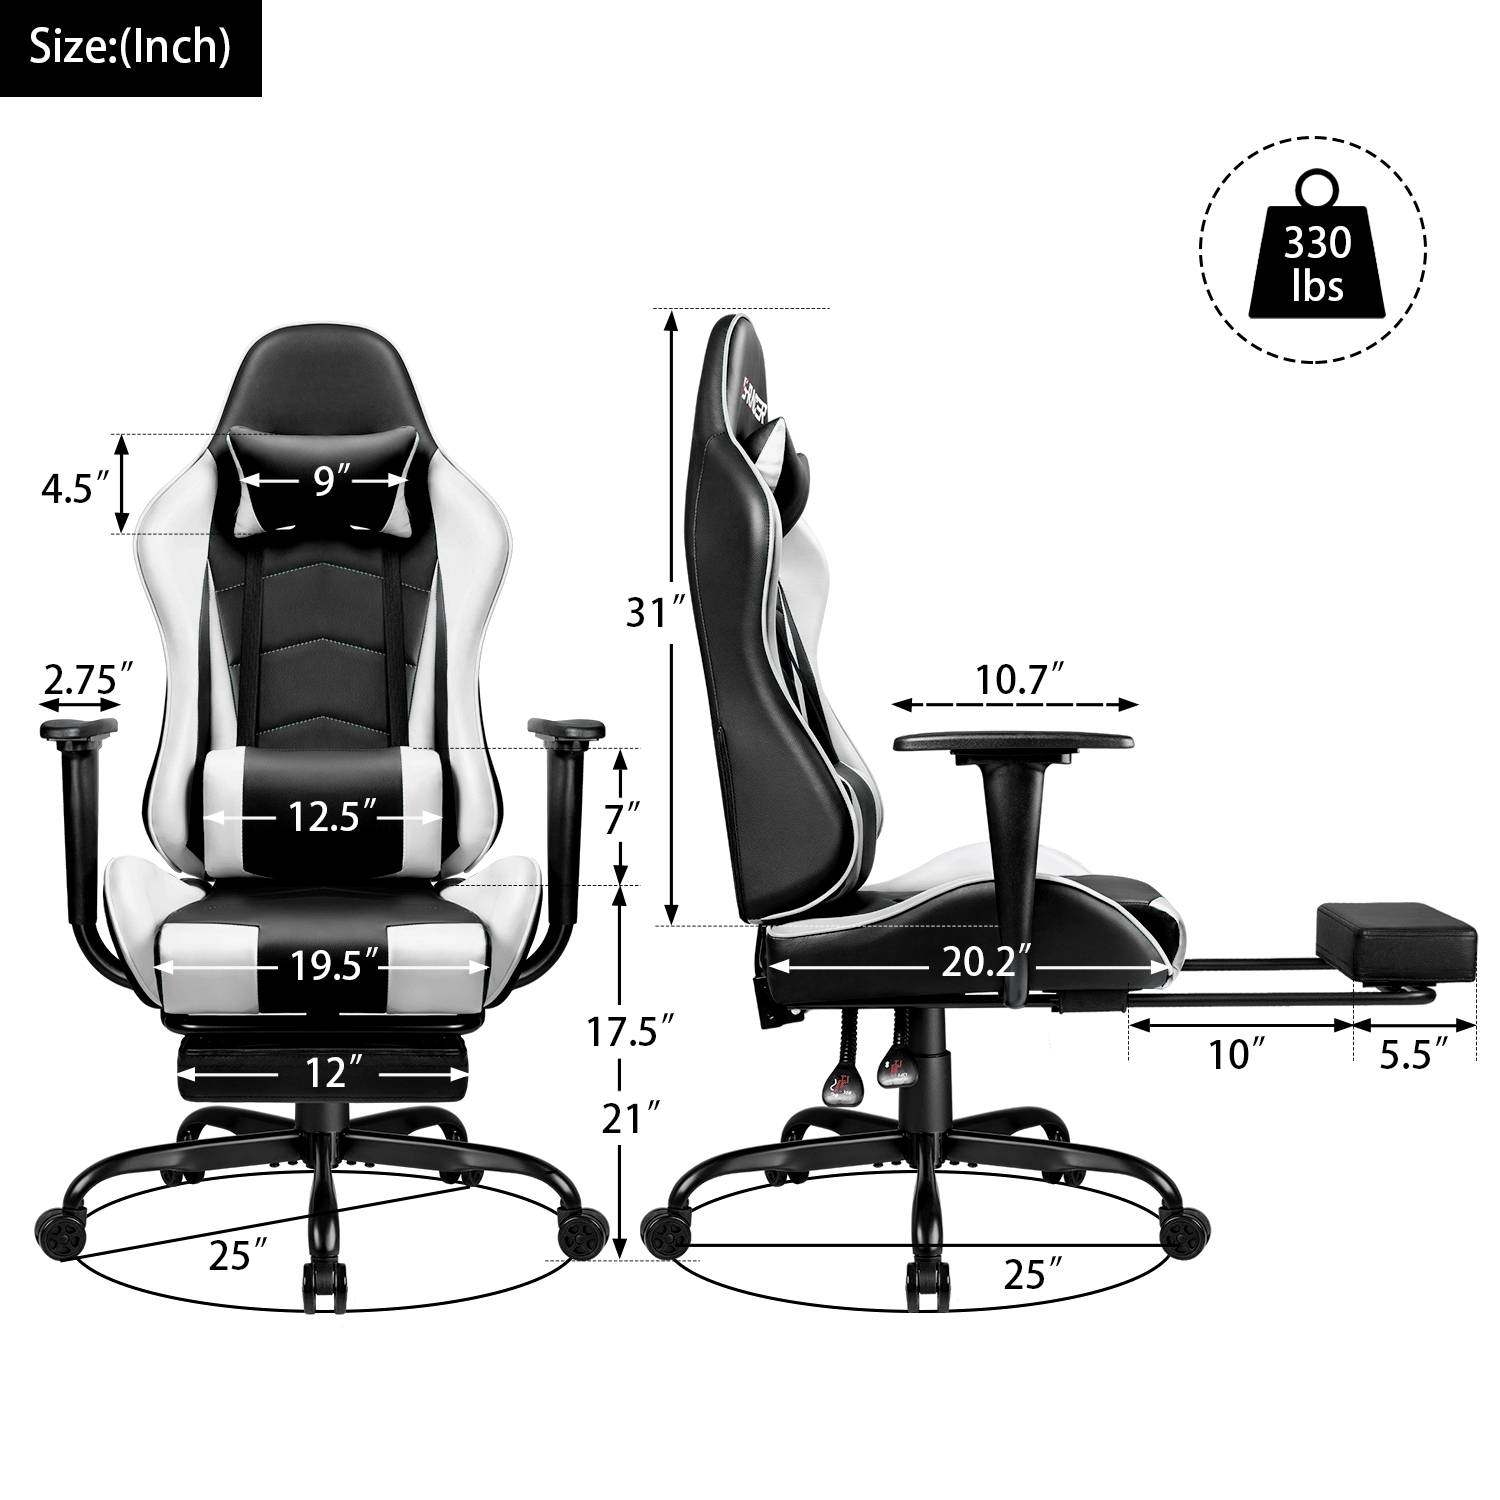 Vineego High-back Recliner Gaming Chair Swivel Office Chair PU Leather ...